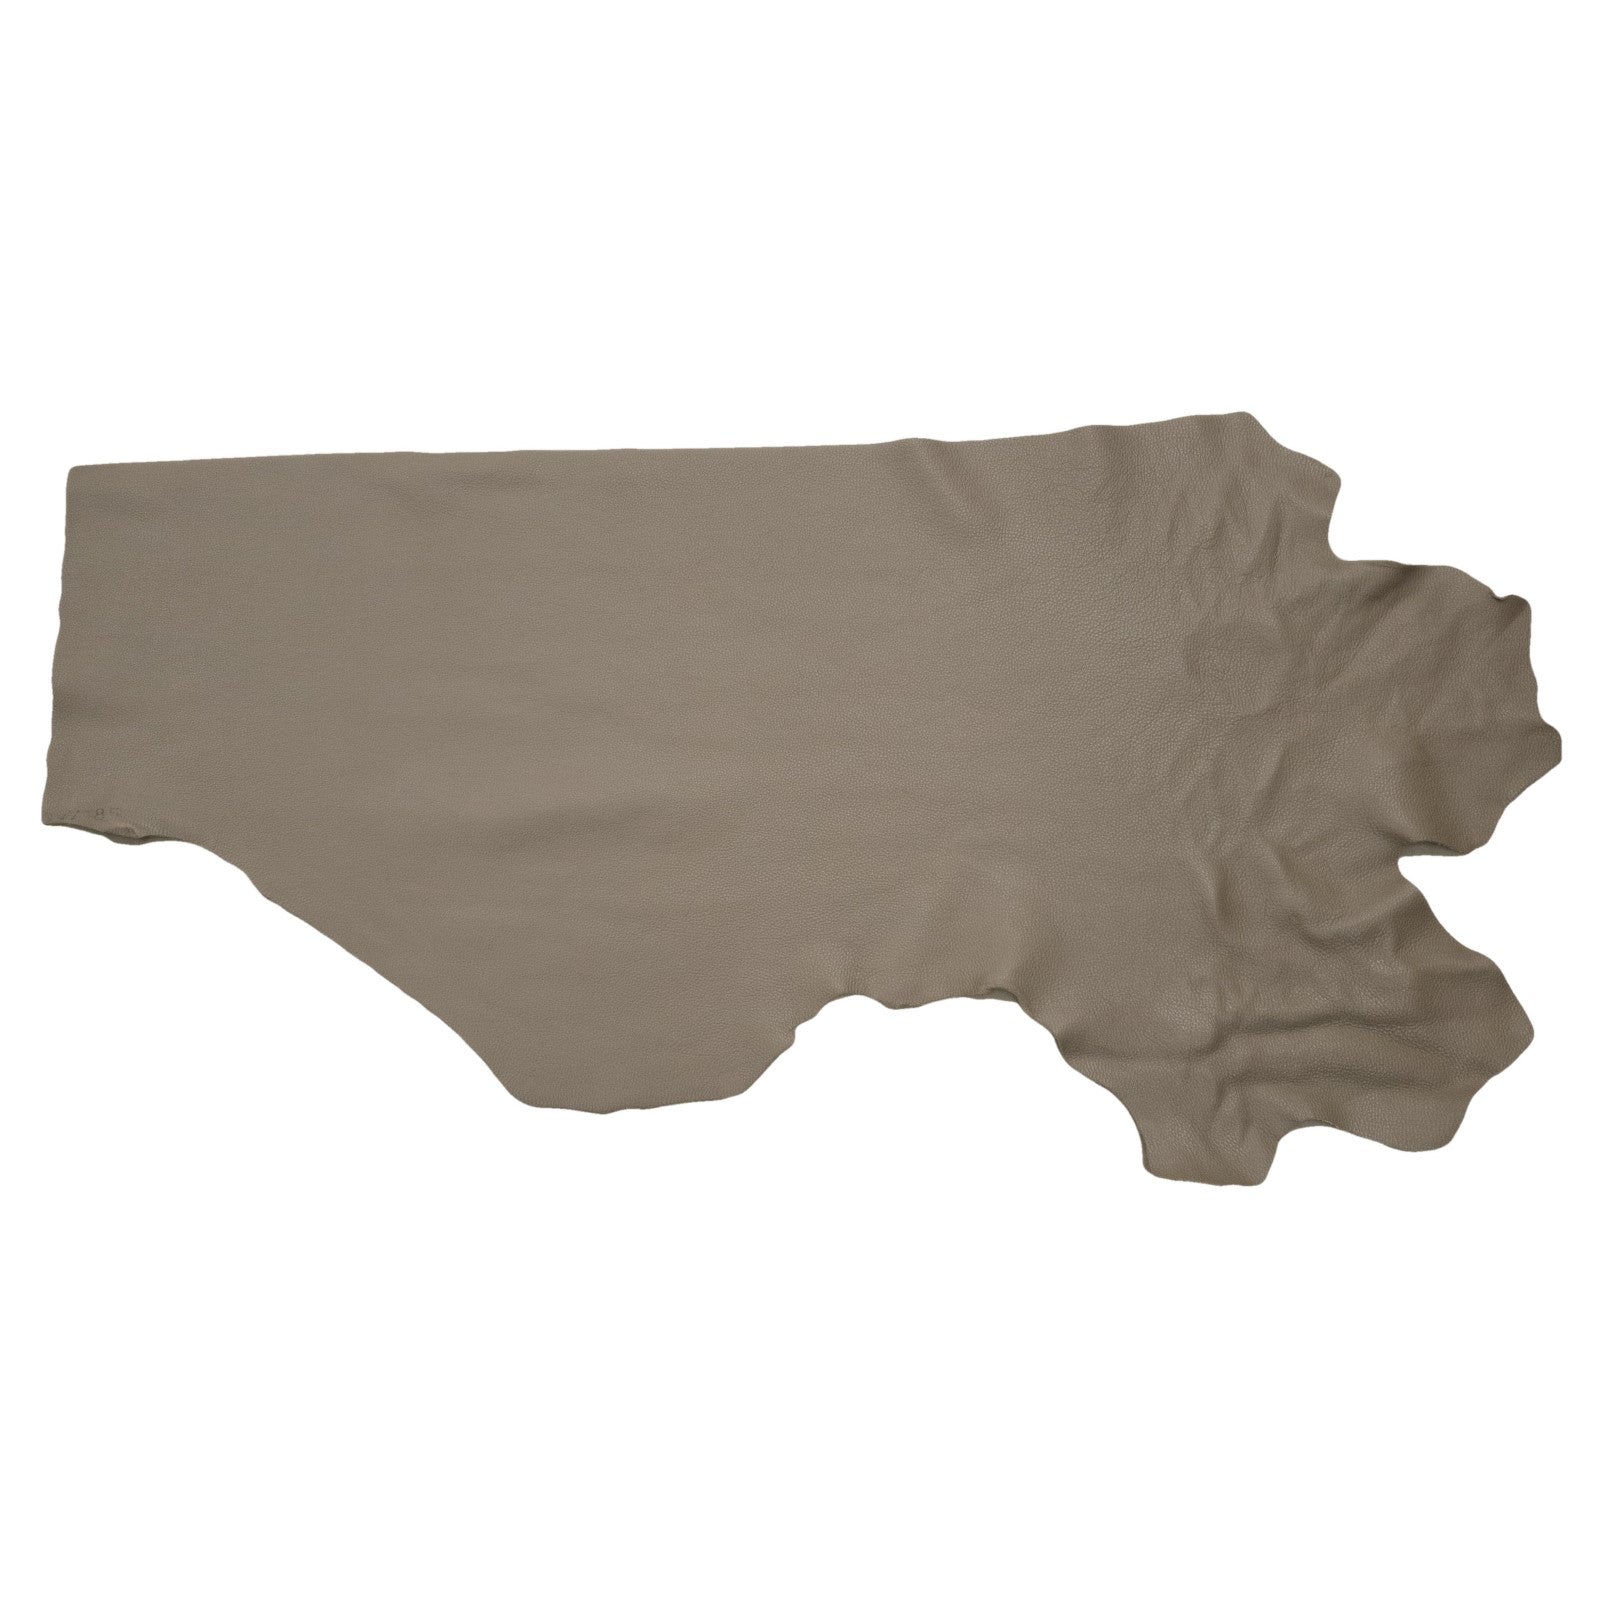 Tan Lines Taupe, Tried n True, Summer Edition,  3-4 oz Leather Cow Hides, 6.5-7.5 Square Foot / Project Piece (Bottom) | The Leather Guy